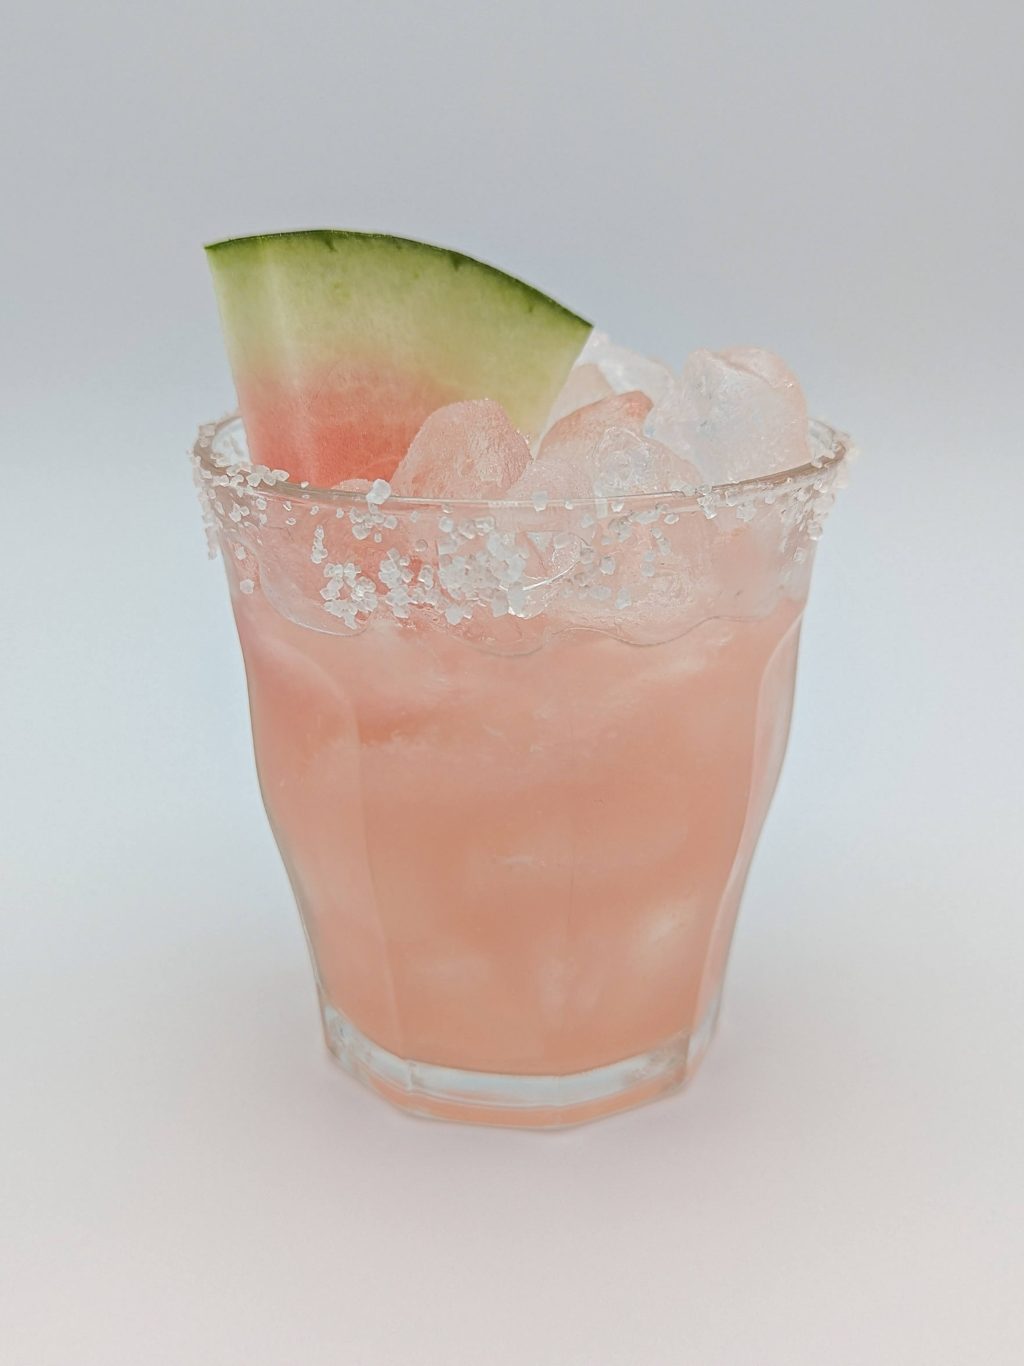 pink liquid in an old fashioned glass filled with ice and garnished with a watermelon slice and salt rim